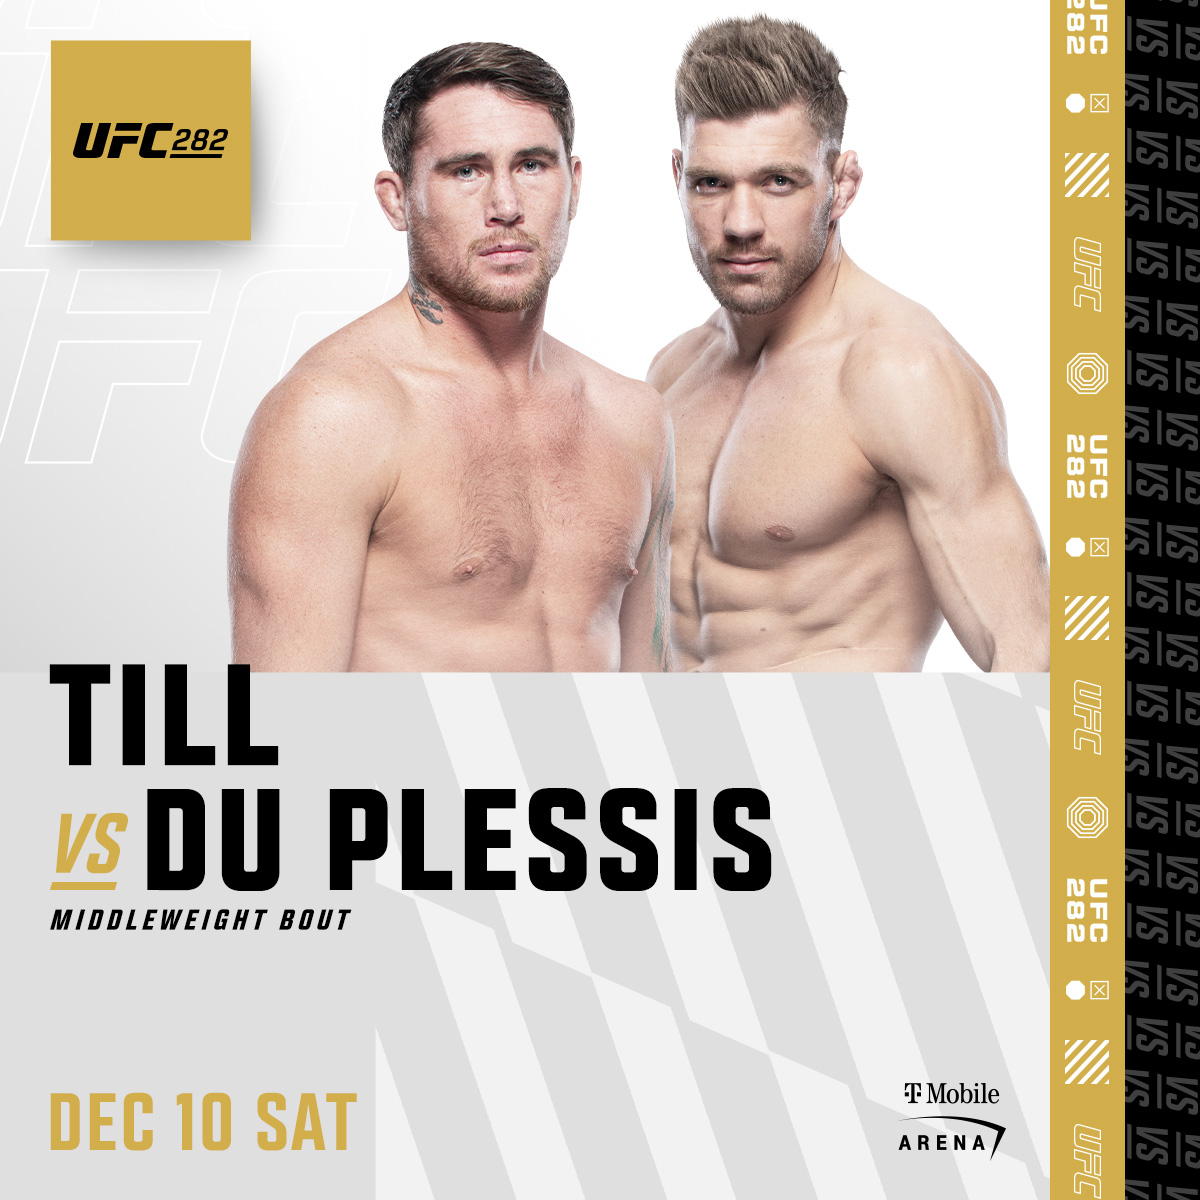 Heading to Las Vegas! ✈️🇺🇸

@DarrenTill2 vs @DricusDuPlessis is signed for #UFC282